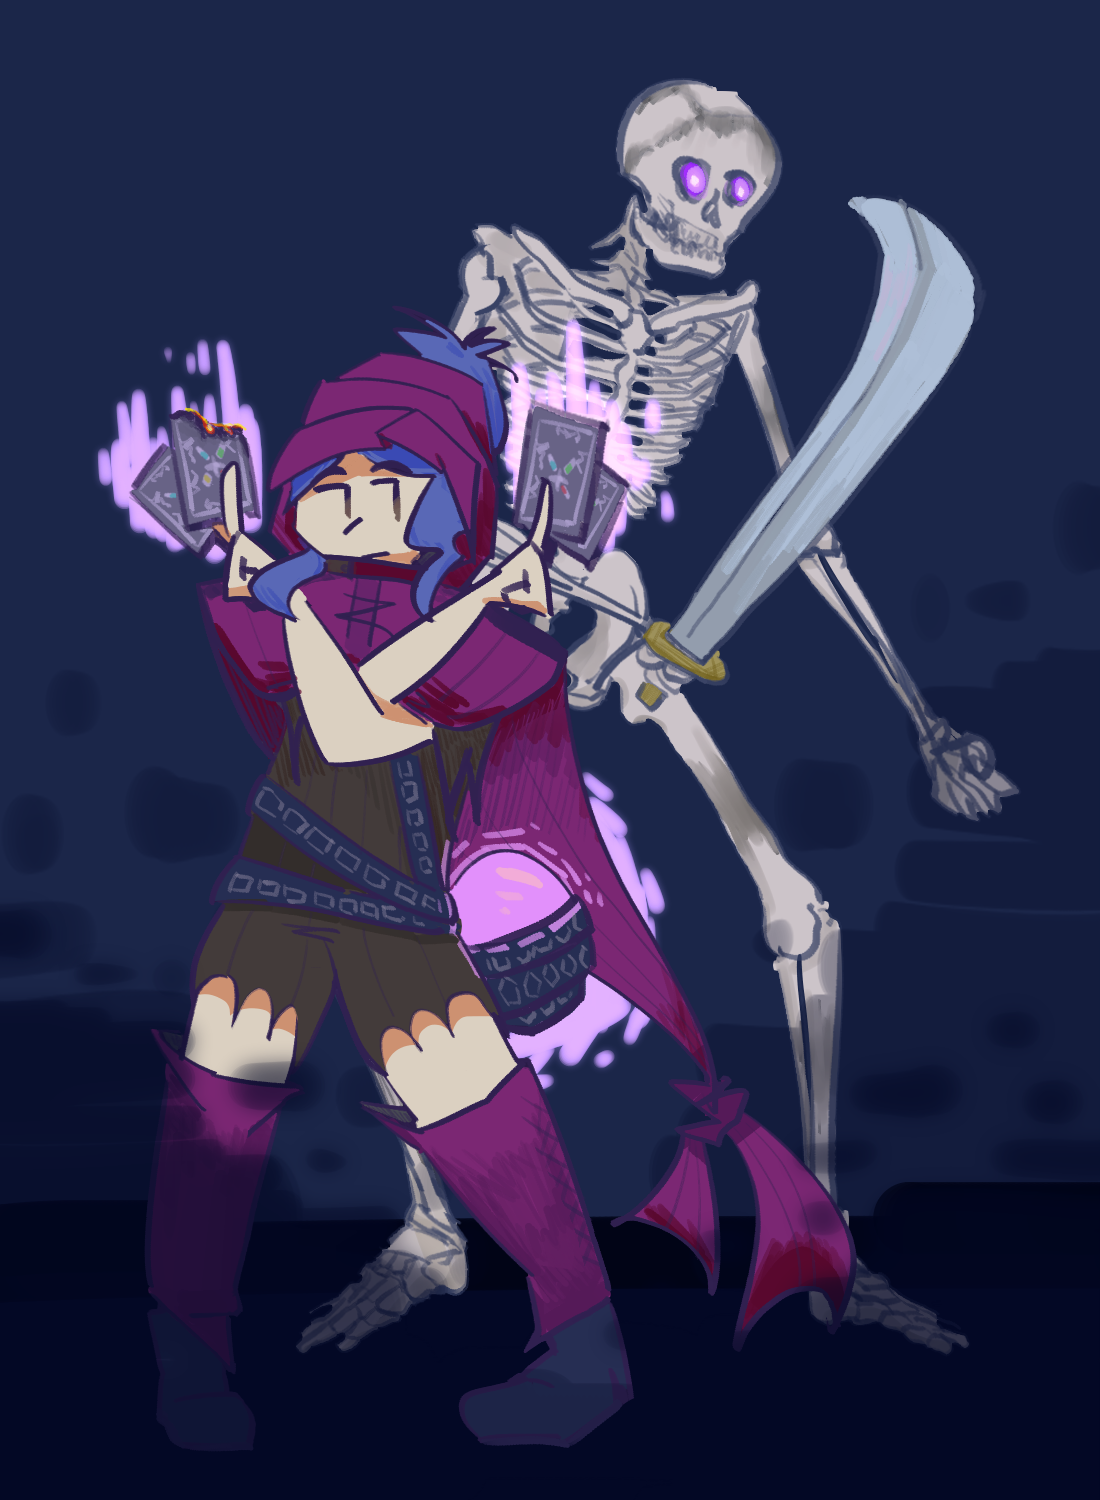 helena and a skeleton from lost kingdoms. helena is wielding four cards between her fingers on both hands, with one card being burnt up by purple flame. the skeleton that towers behind her has purple glowing eyes and a sabre-like sword in its hand. the background is dark blue, with even darker blue fog on the bottom.